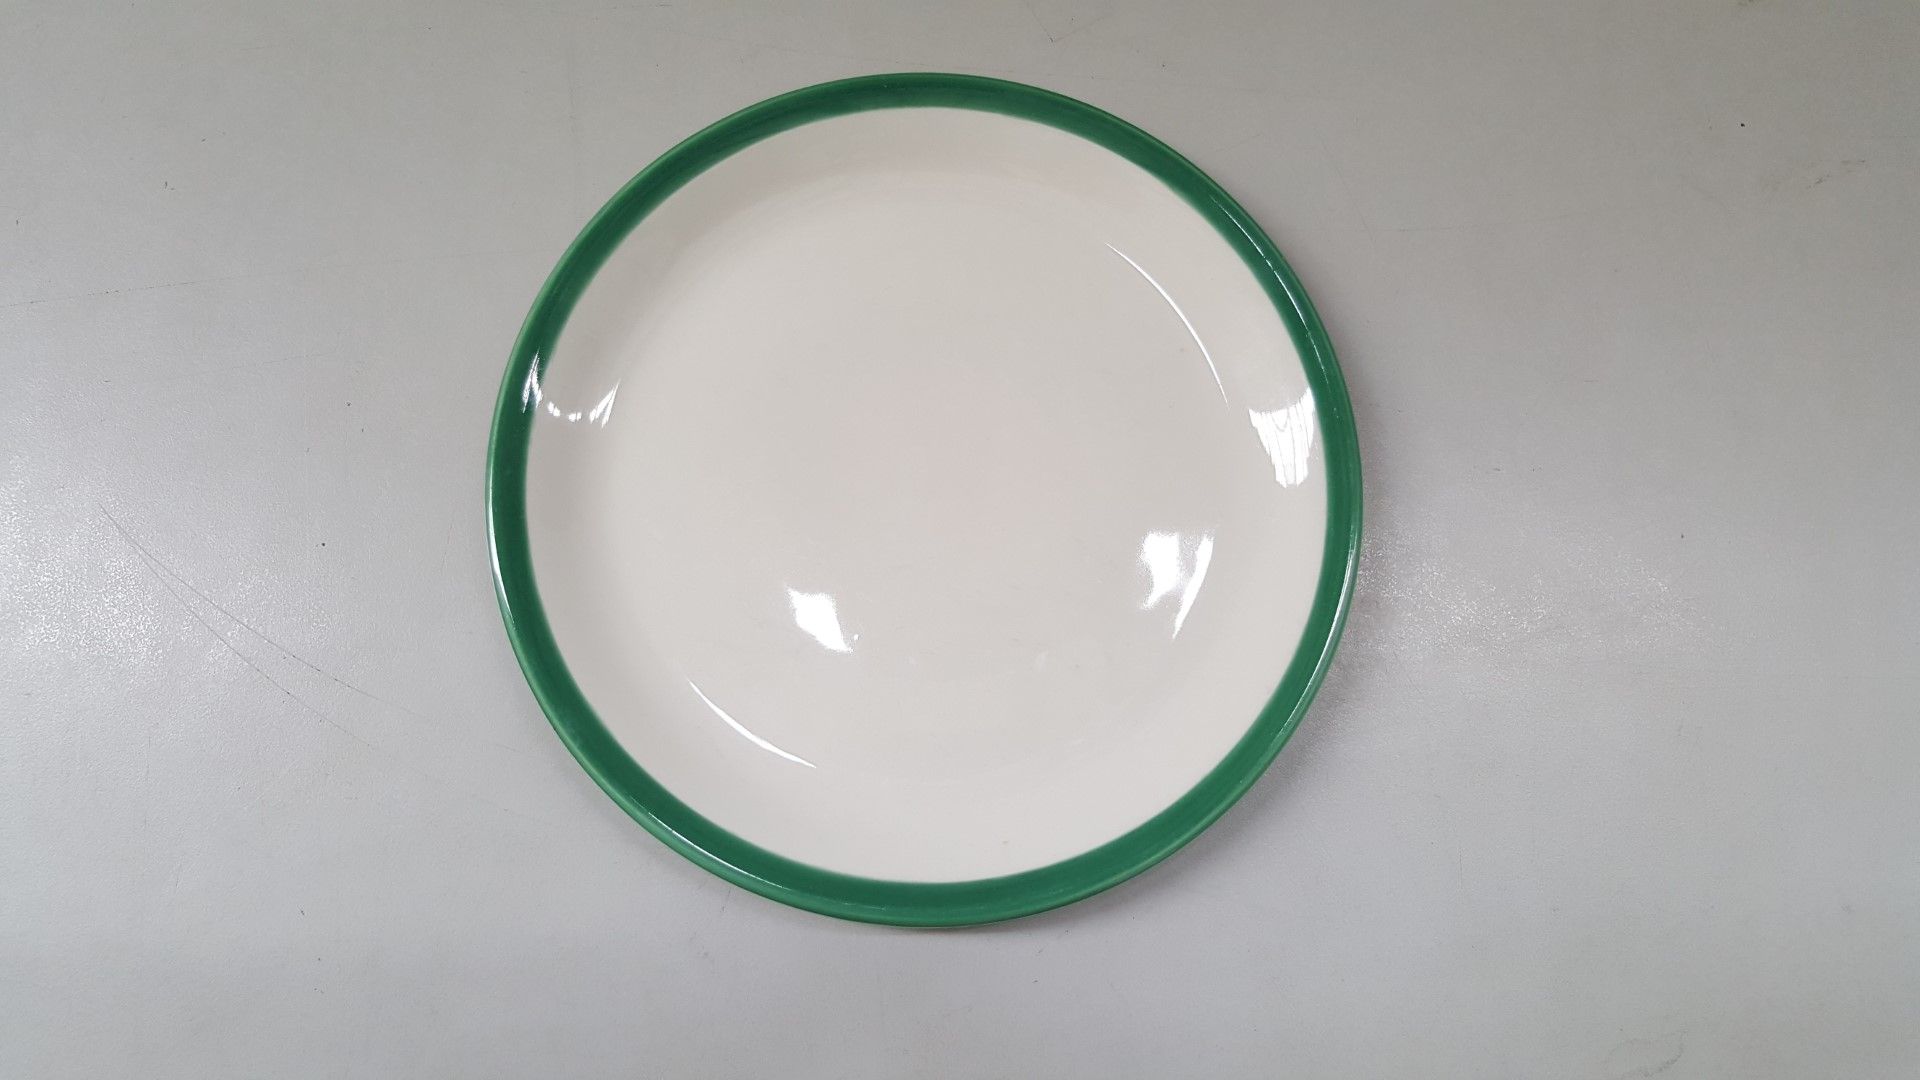 22 x Steelite Coupe Plates White With Green Outline Egde 20CM - Ref CQ281 - Image 3 of 4